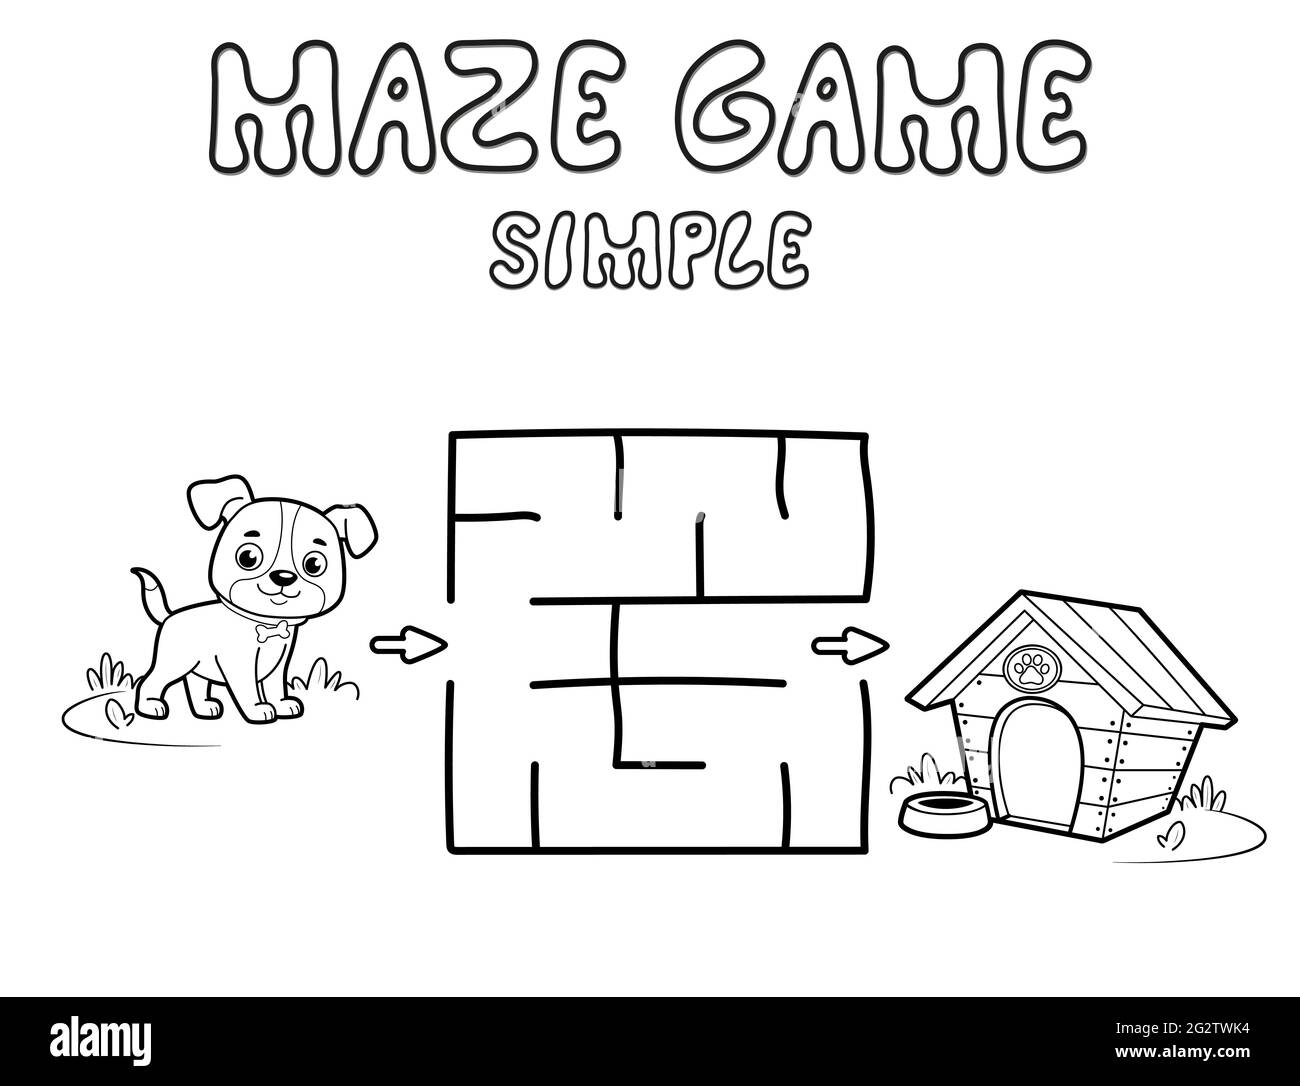 https://c8.alamy.com/comp/2G2TWK4/simple-maze-puzzle-game-for-children-outline-simple-maze-or-labyrinth-game-with-dog-vector-illustrations-2G2TWK4.jpg